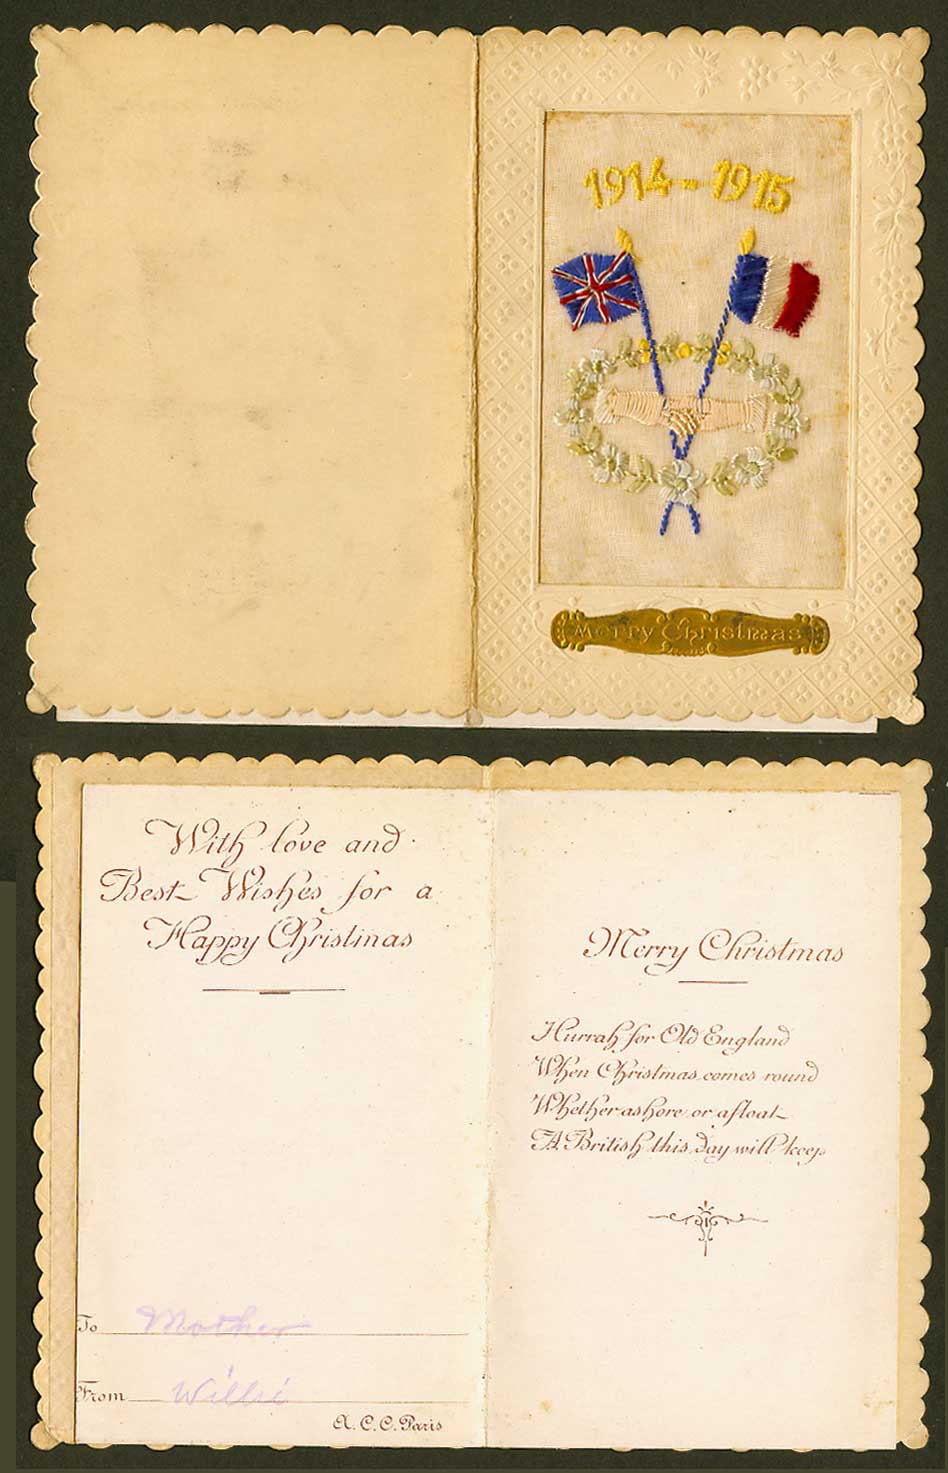 WW1 SILK Embroidered Old Greeting Card 1914-1915 Merry Christmas Hands acs Flags